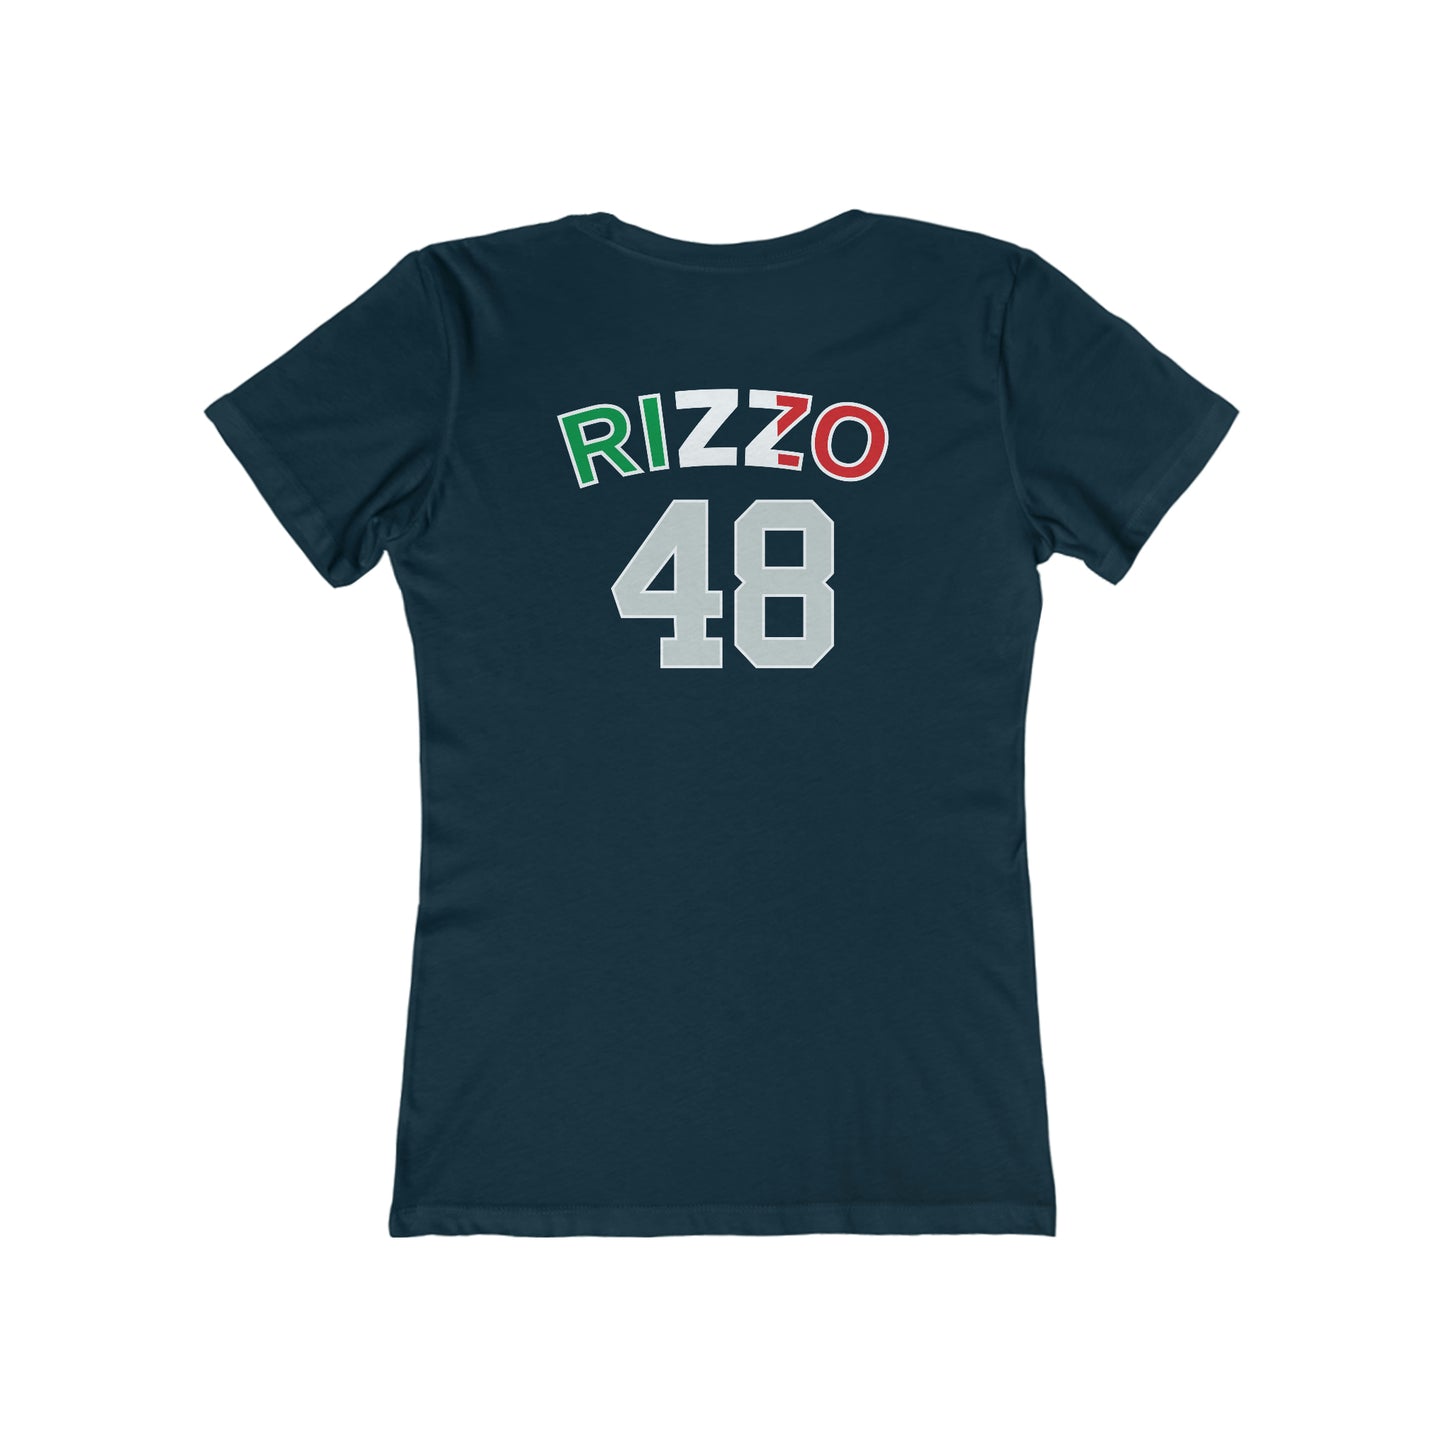 Anthony Rizzo - Women's T-Shirt (front and back)